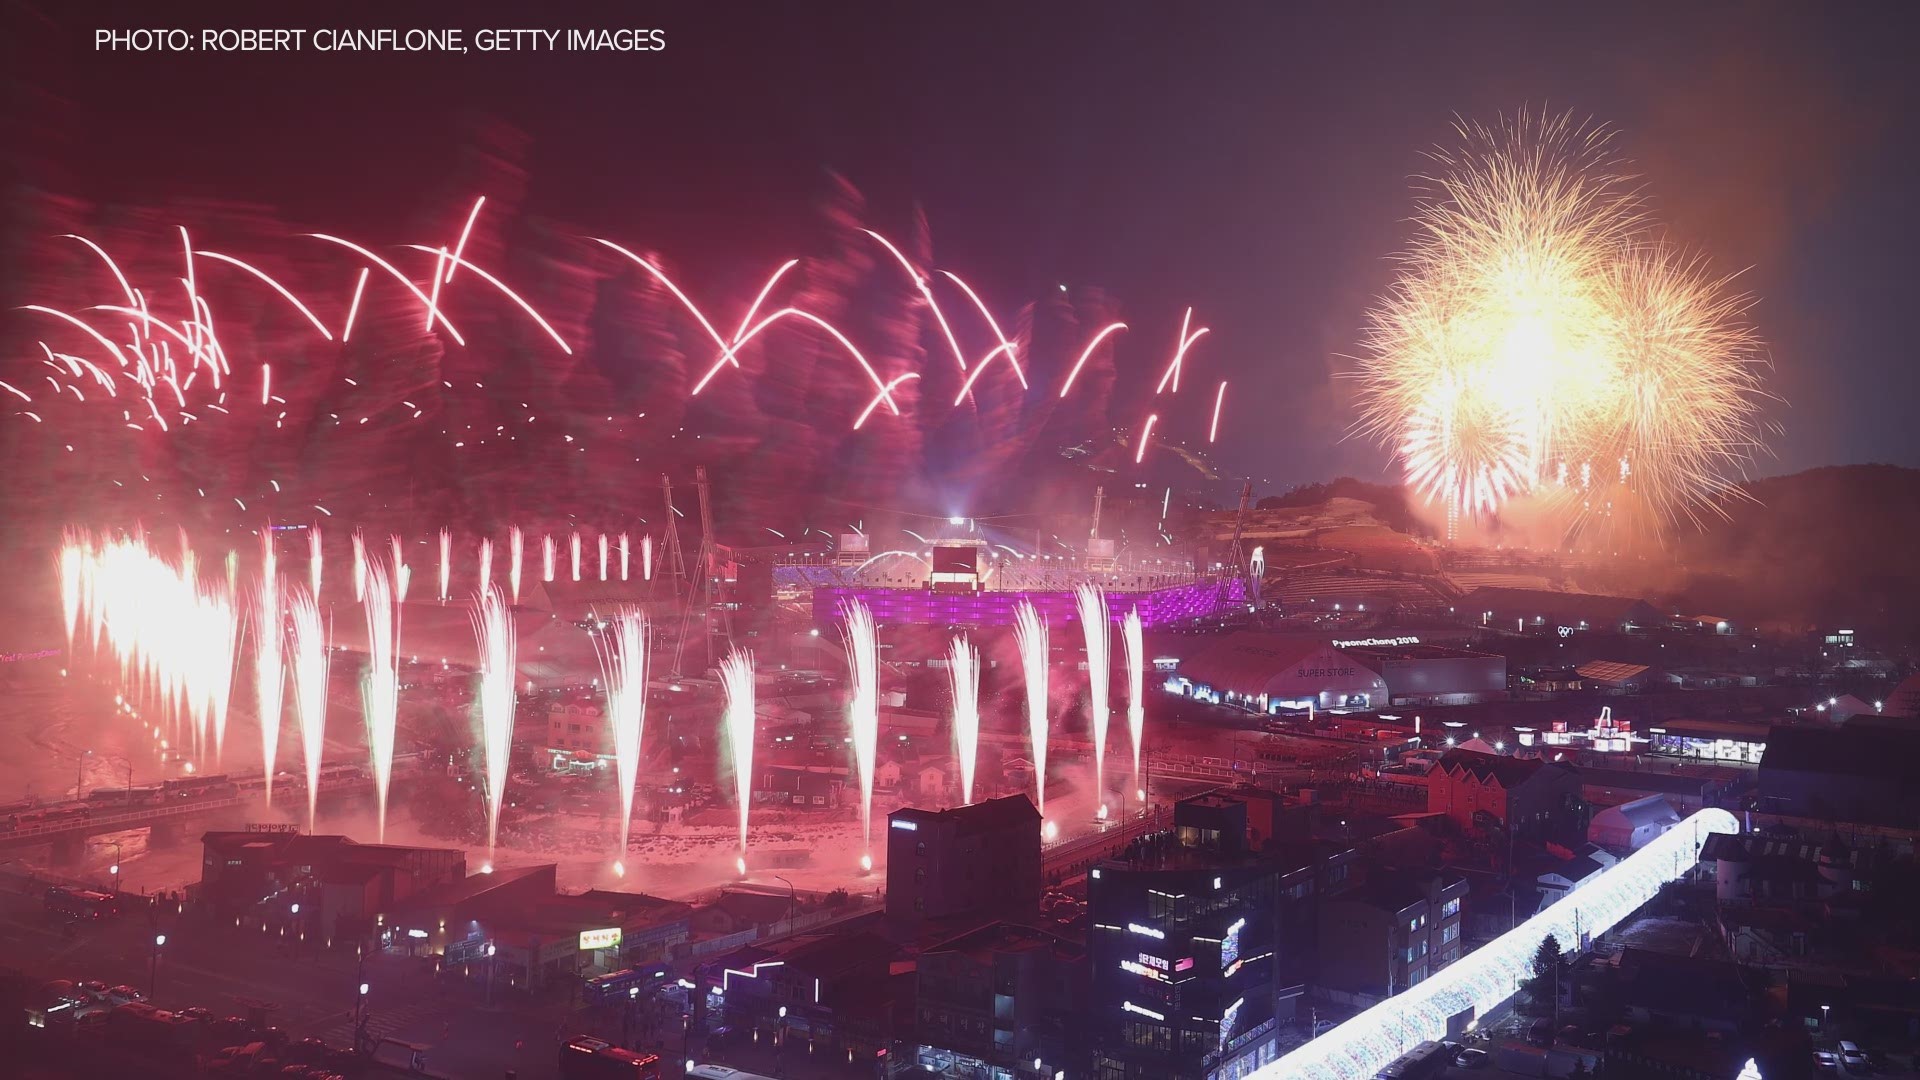 Check out photos from the 2018 Winter Games Opening Ceremony in PyeongChang, South Korea.